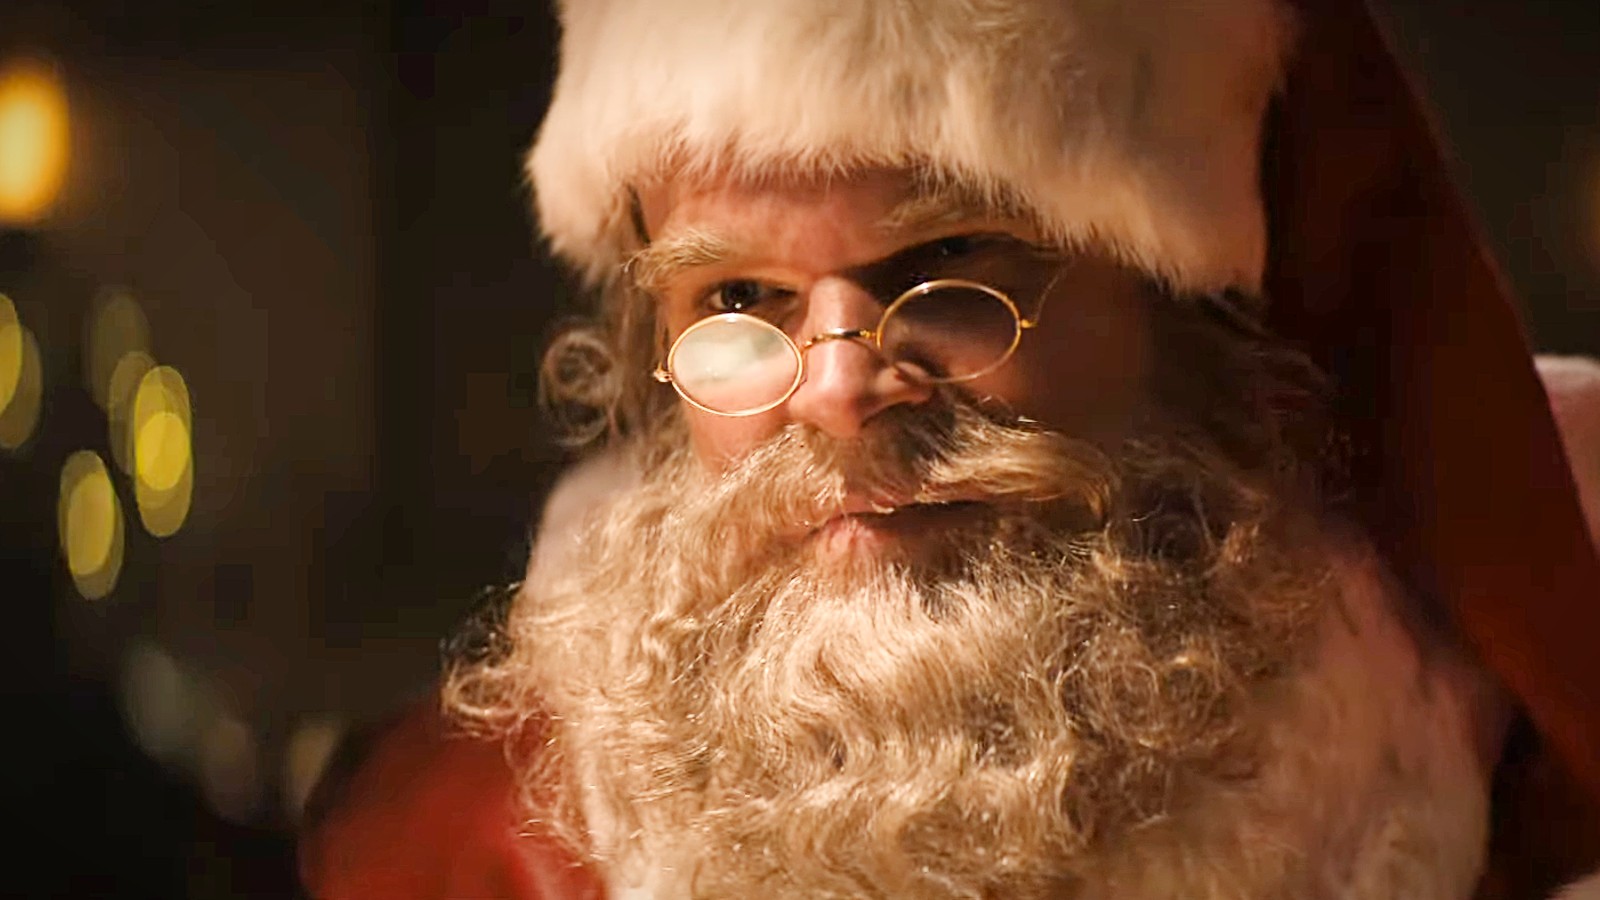 David Harbour dishes on his twisted version of Santa Claus in ‘Violent Night’